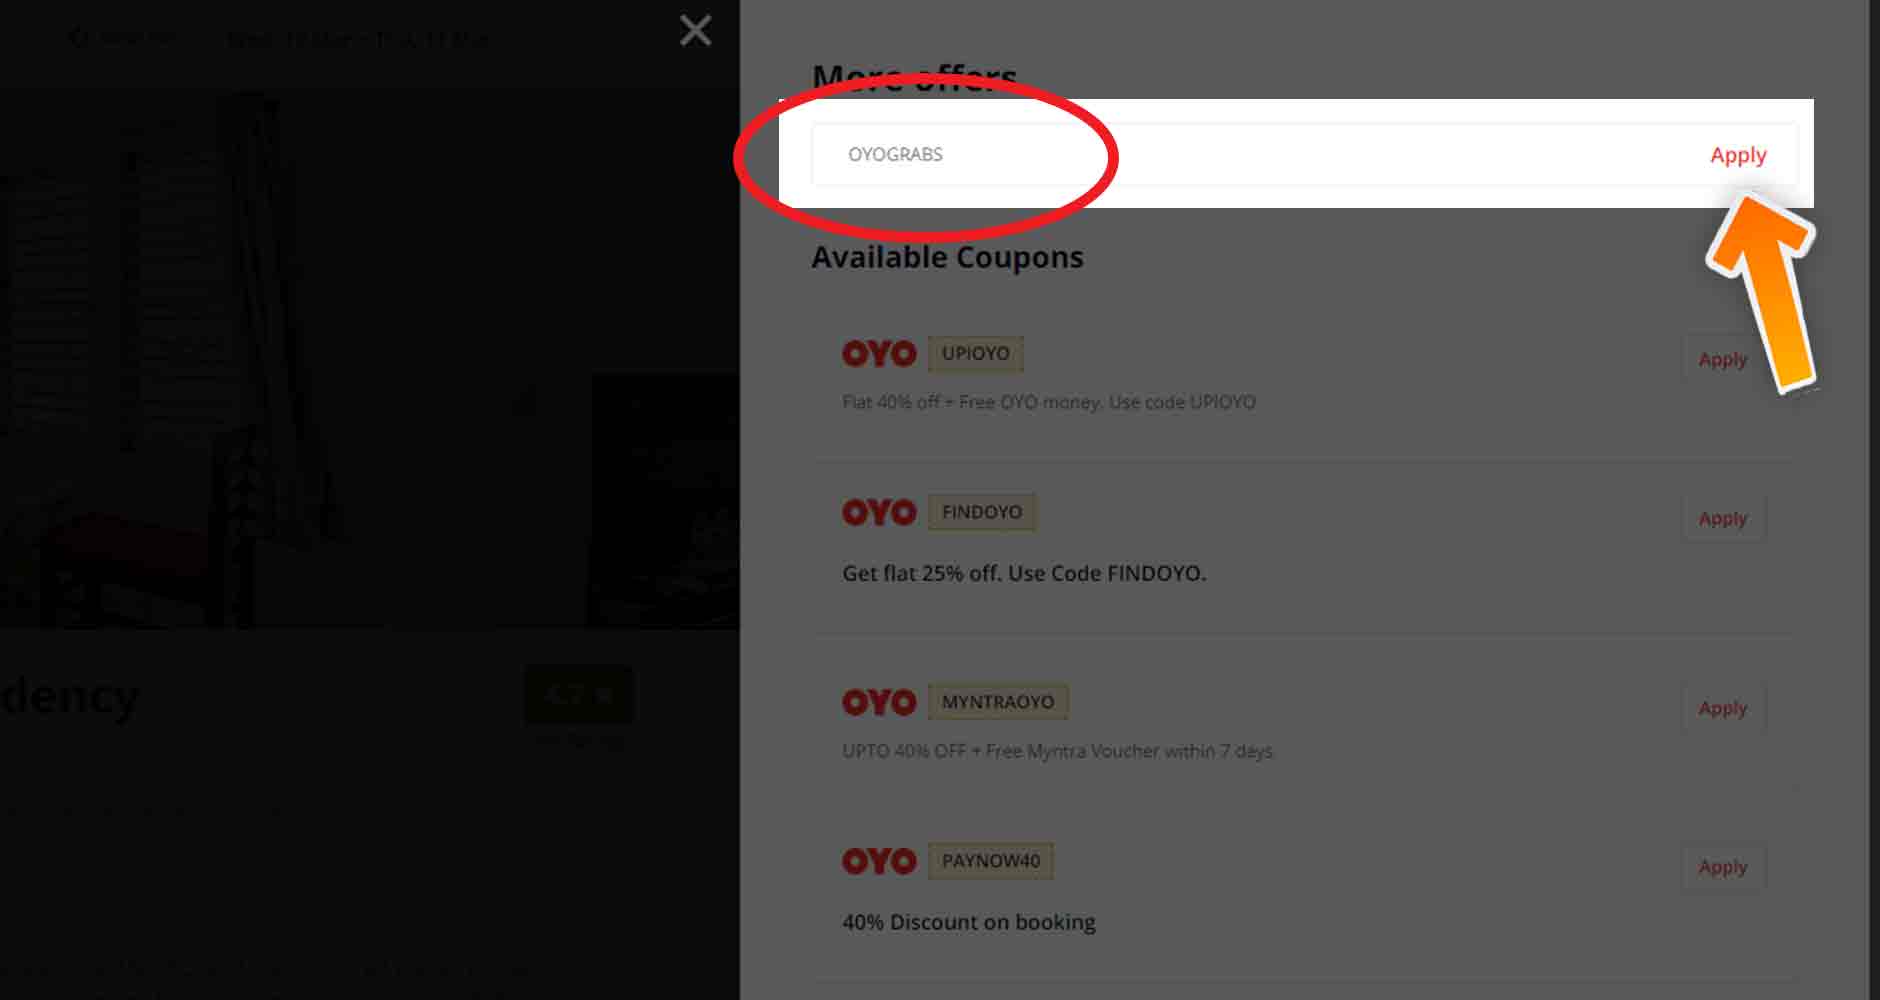 How to Use OYO Coupons